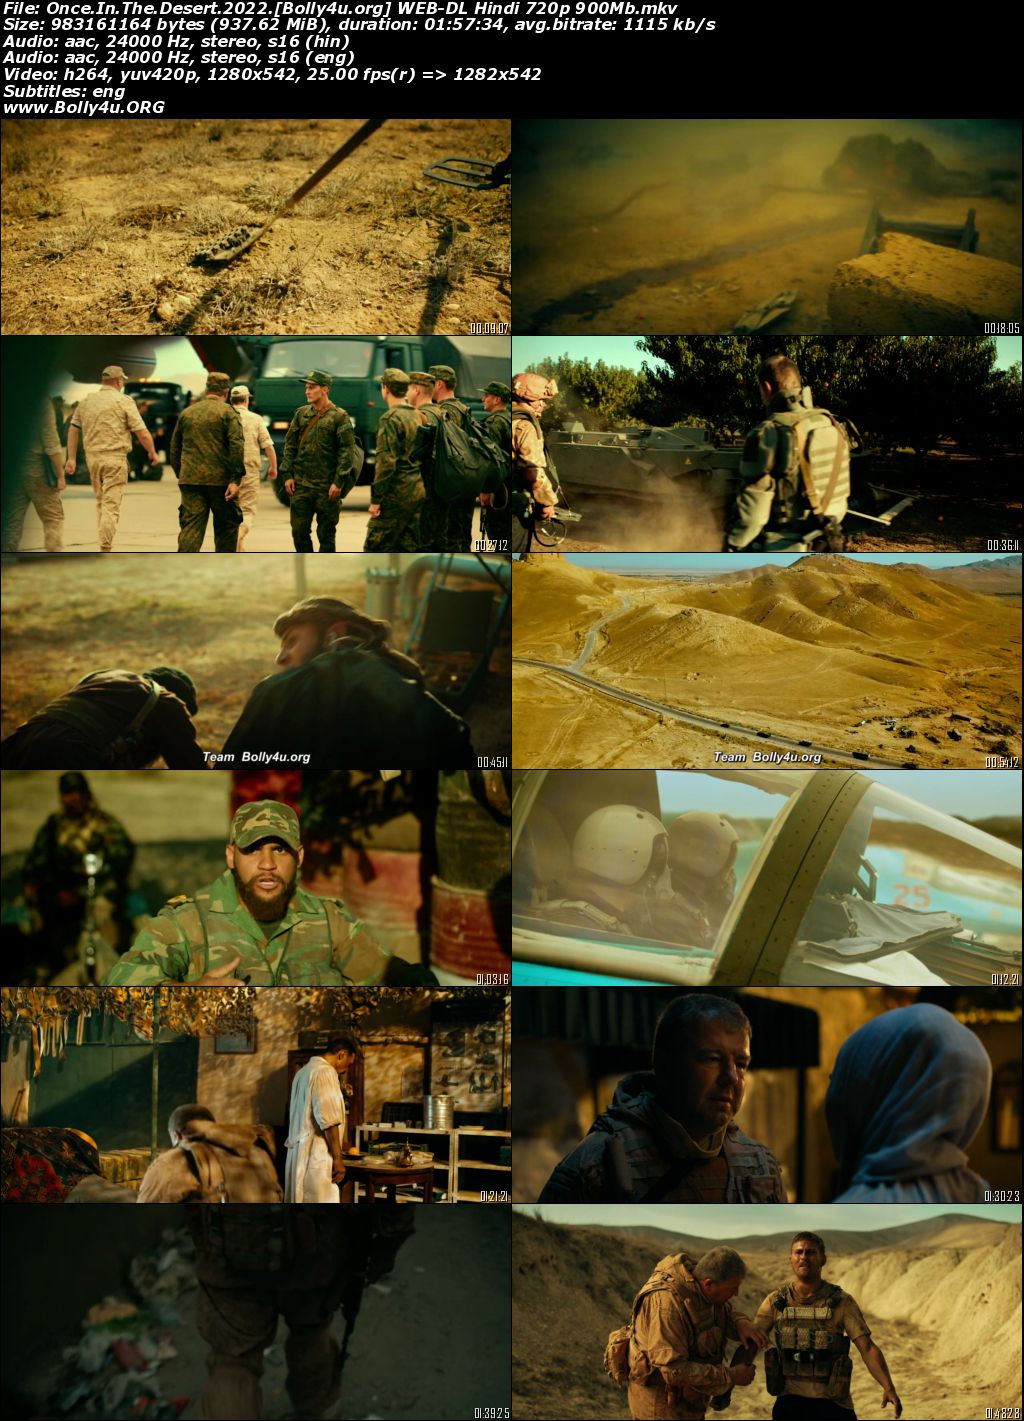 Once In The Desert 2022 WEB-DL Hindi Full Movie Download 1080p 720p 480p